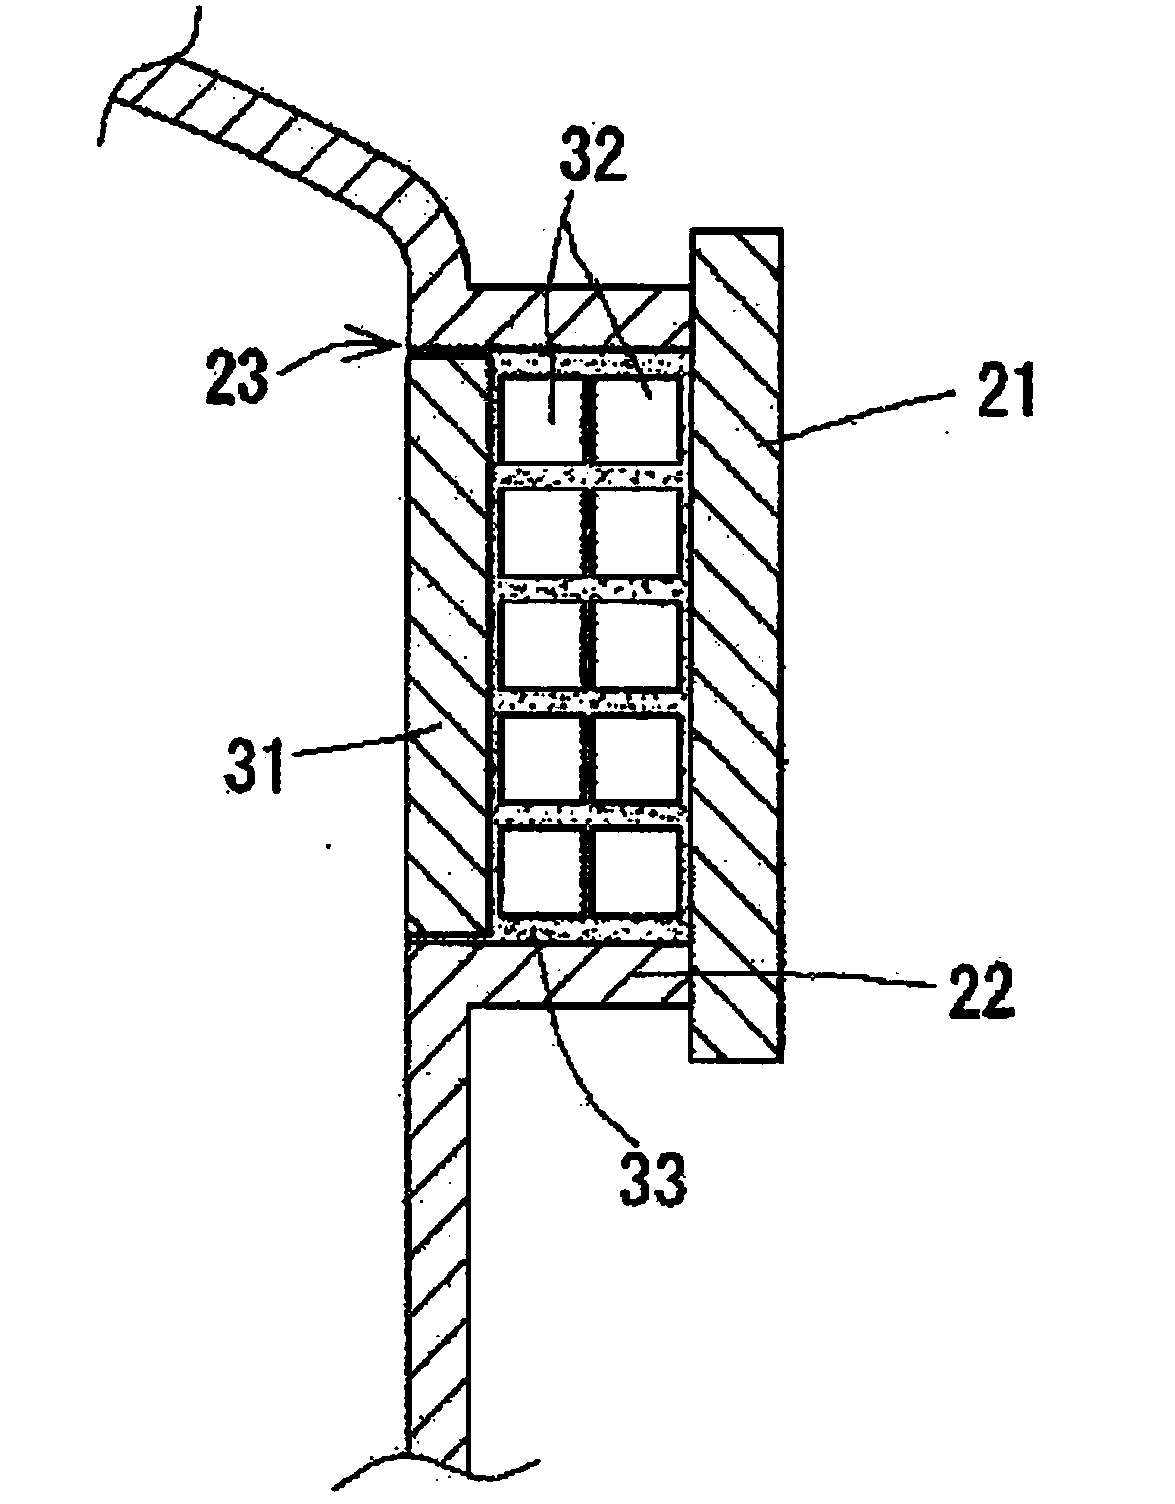 Fluidized bed reactor and method for producing nitrile compound using same